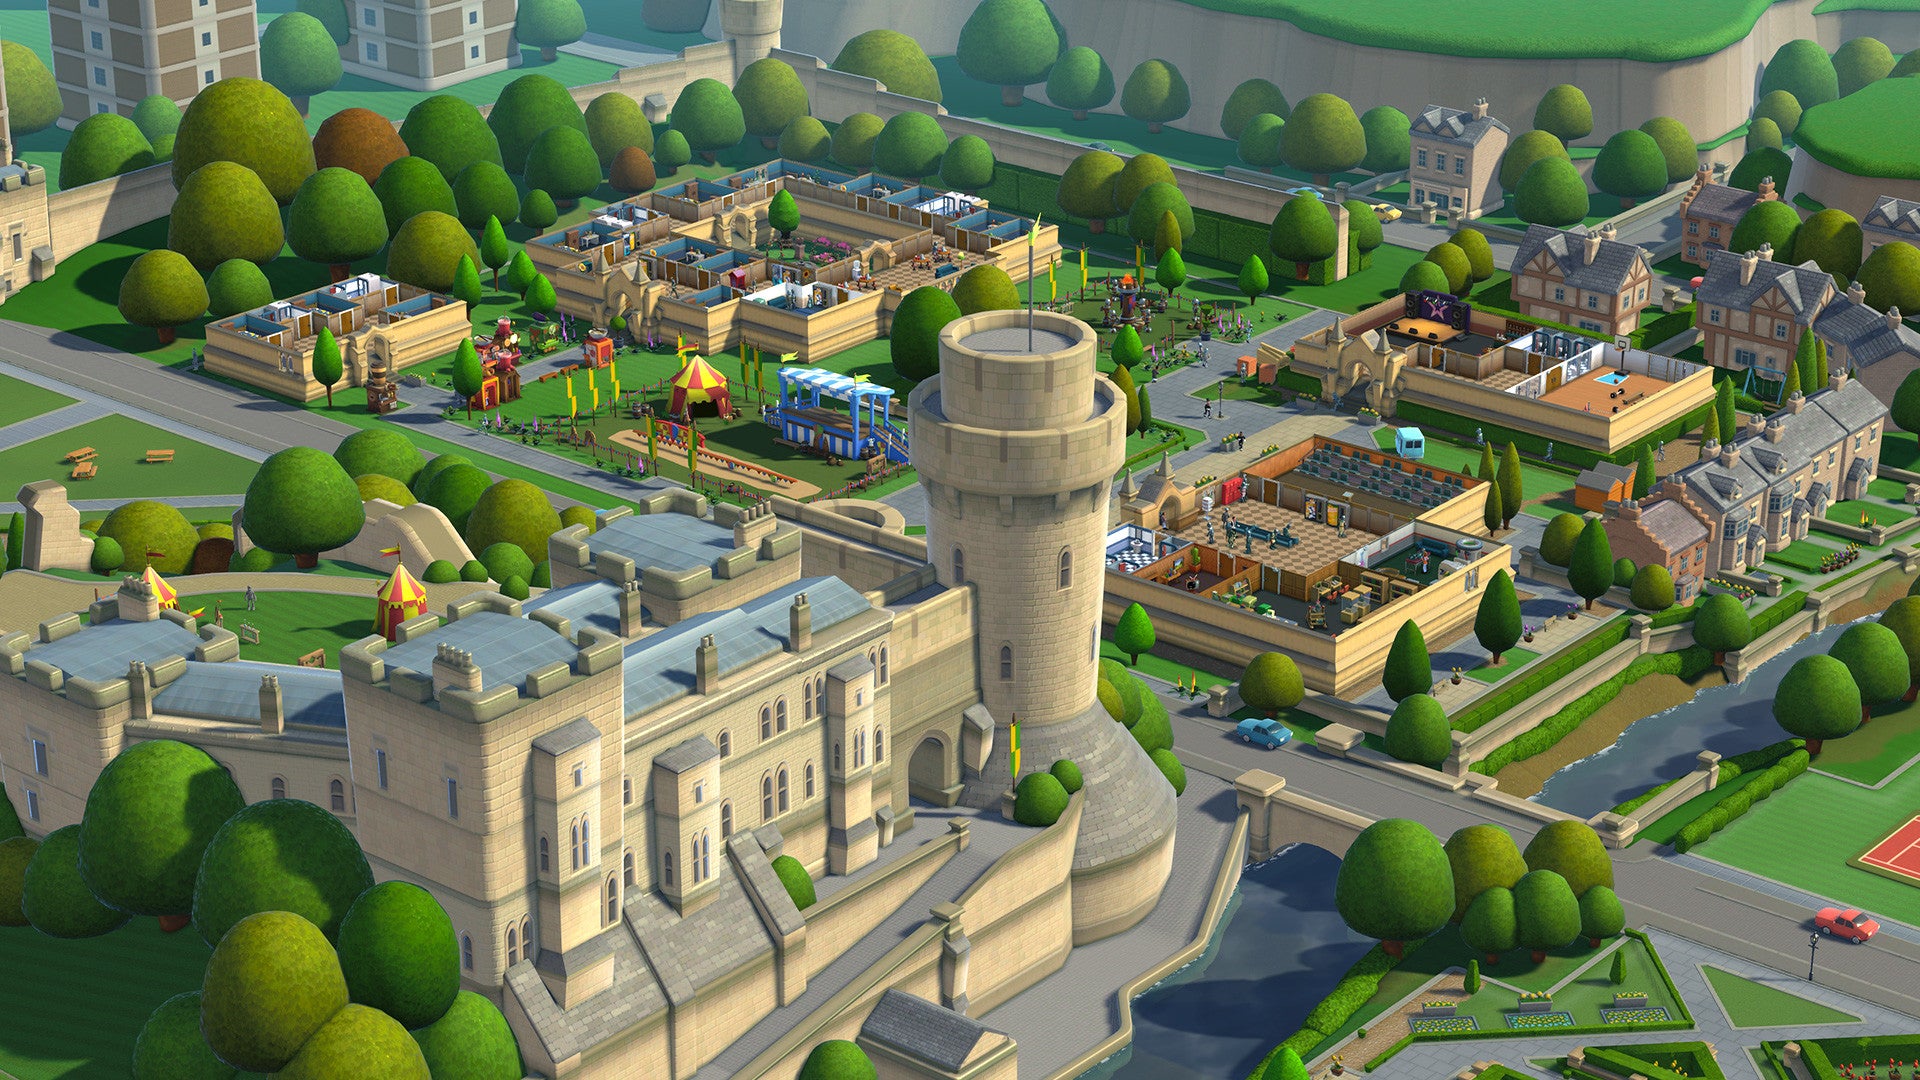 Two Point Hospital follow-up Two Point Campus is coming in May